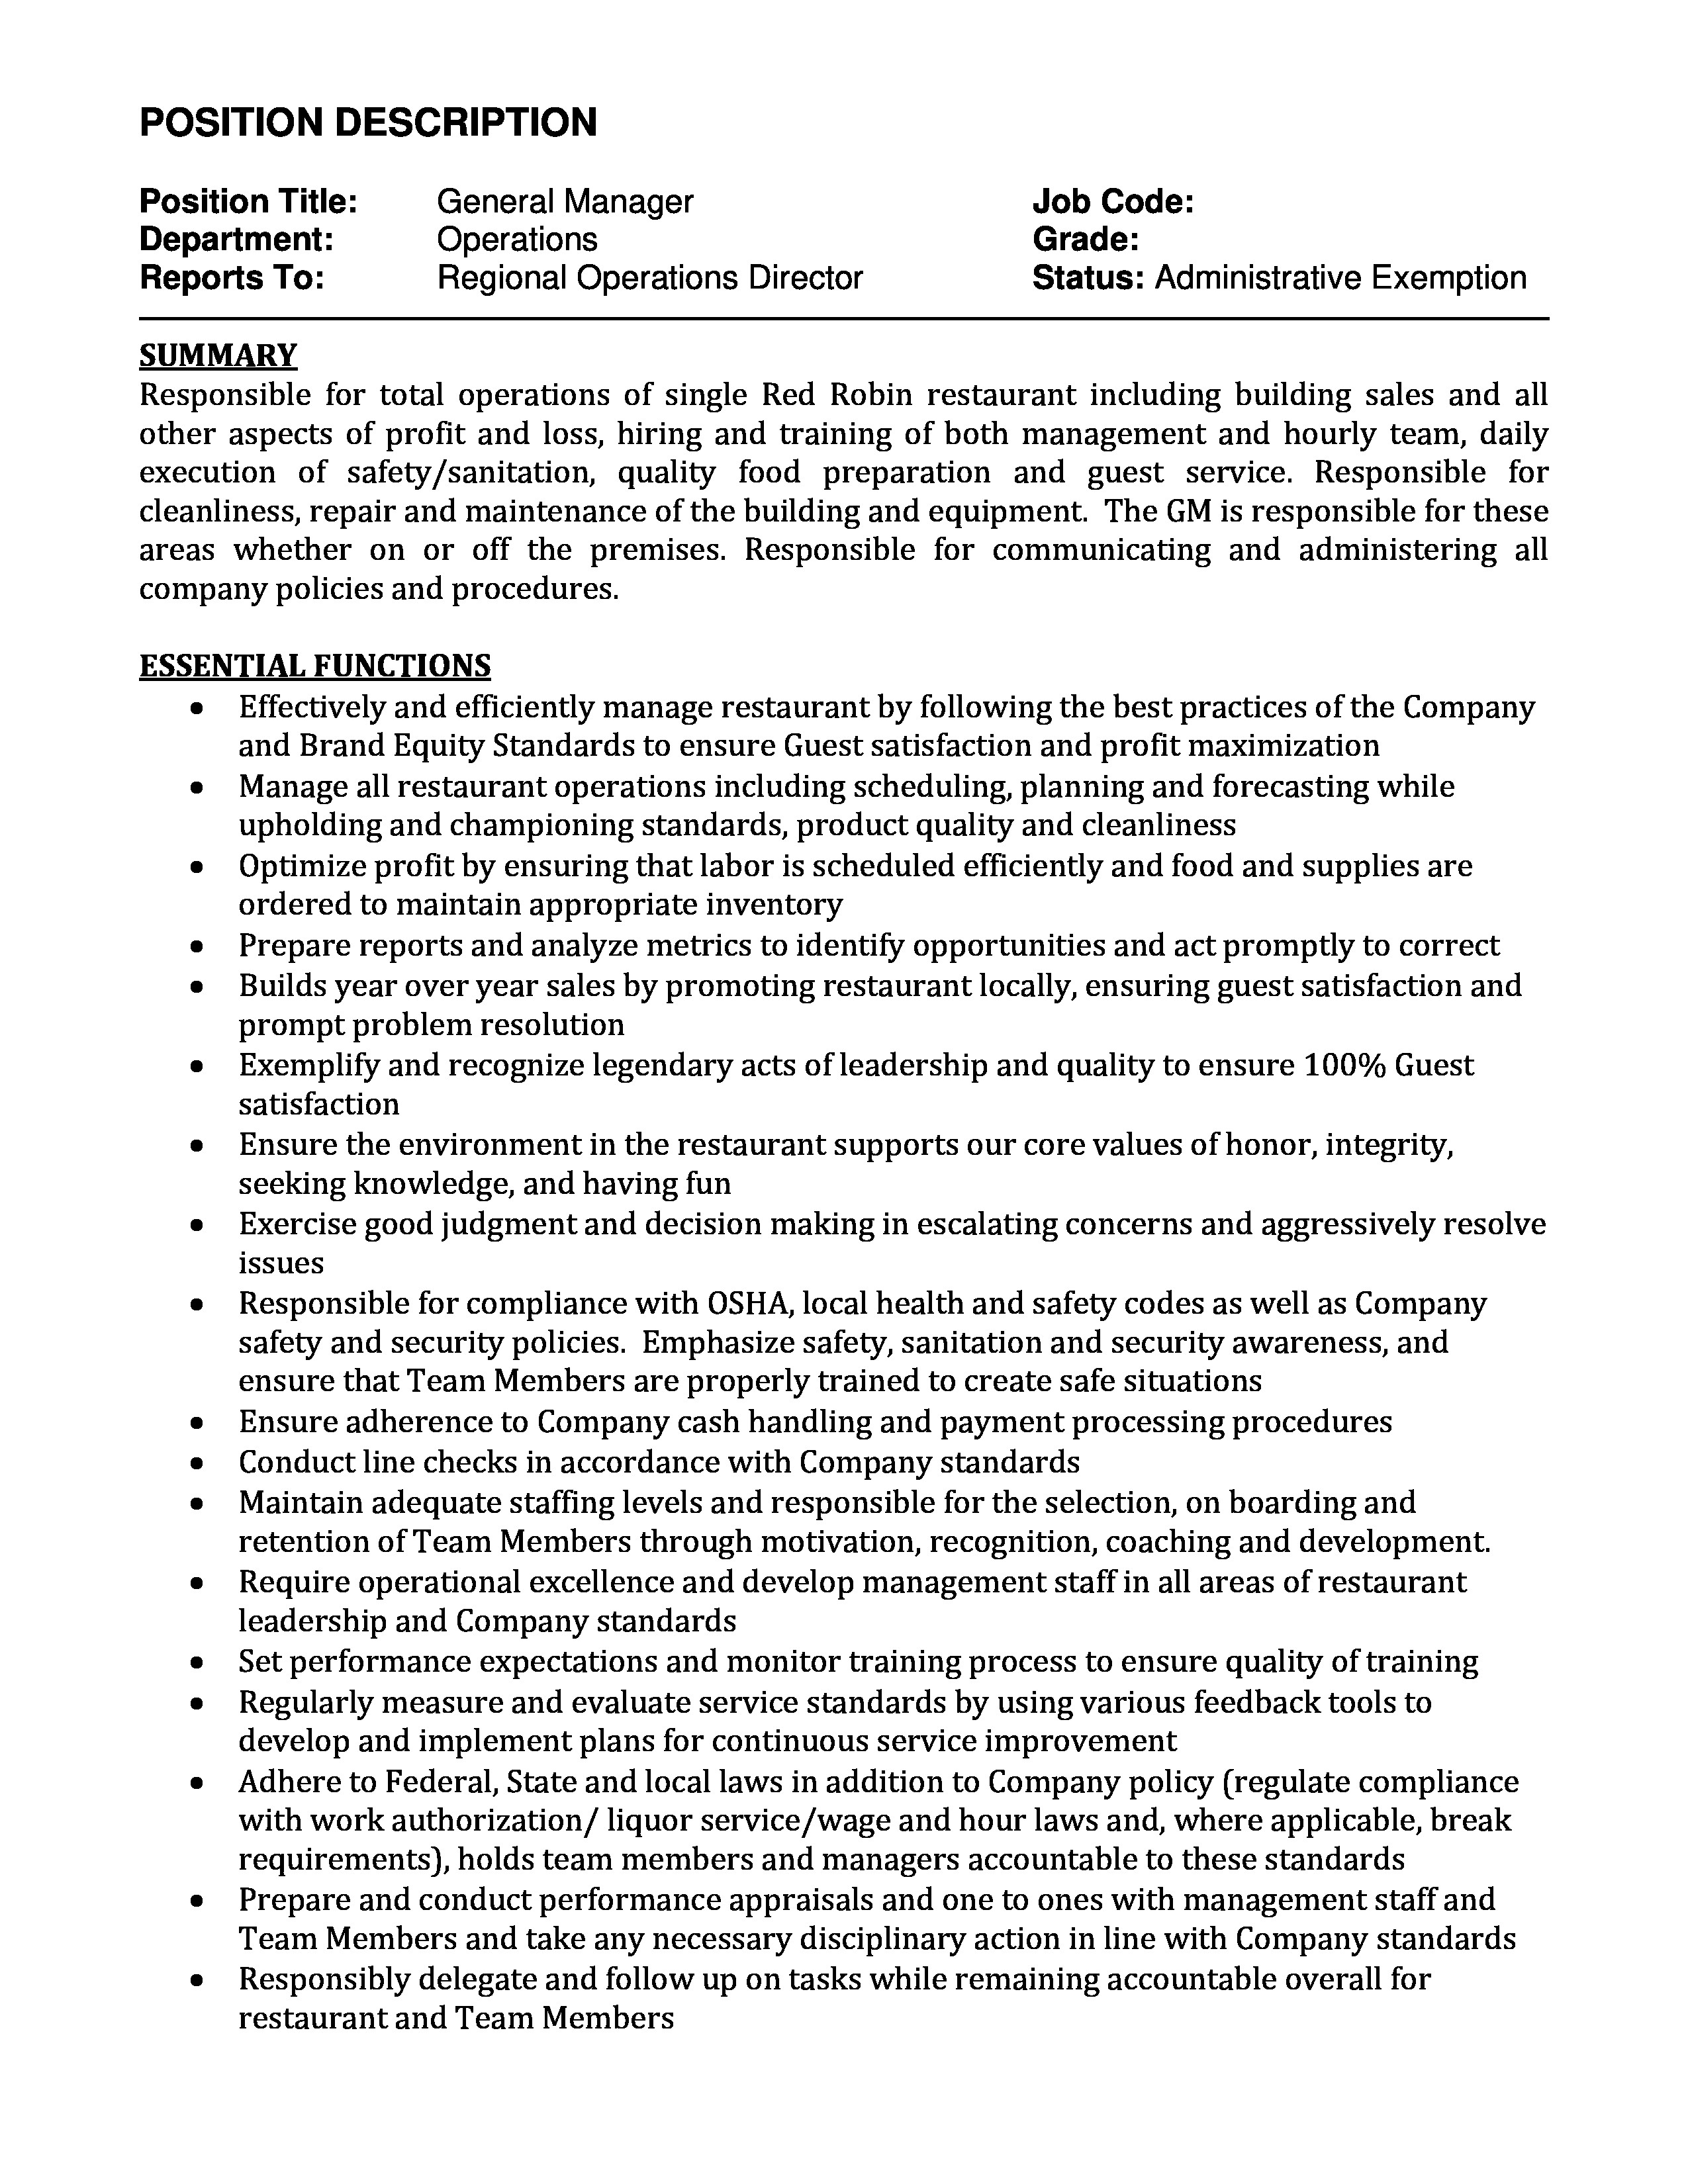 Free Position Description Example For General Manager Templates At Document